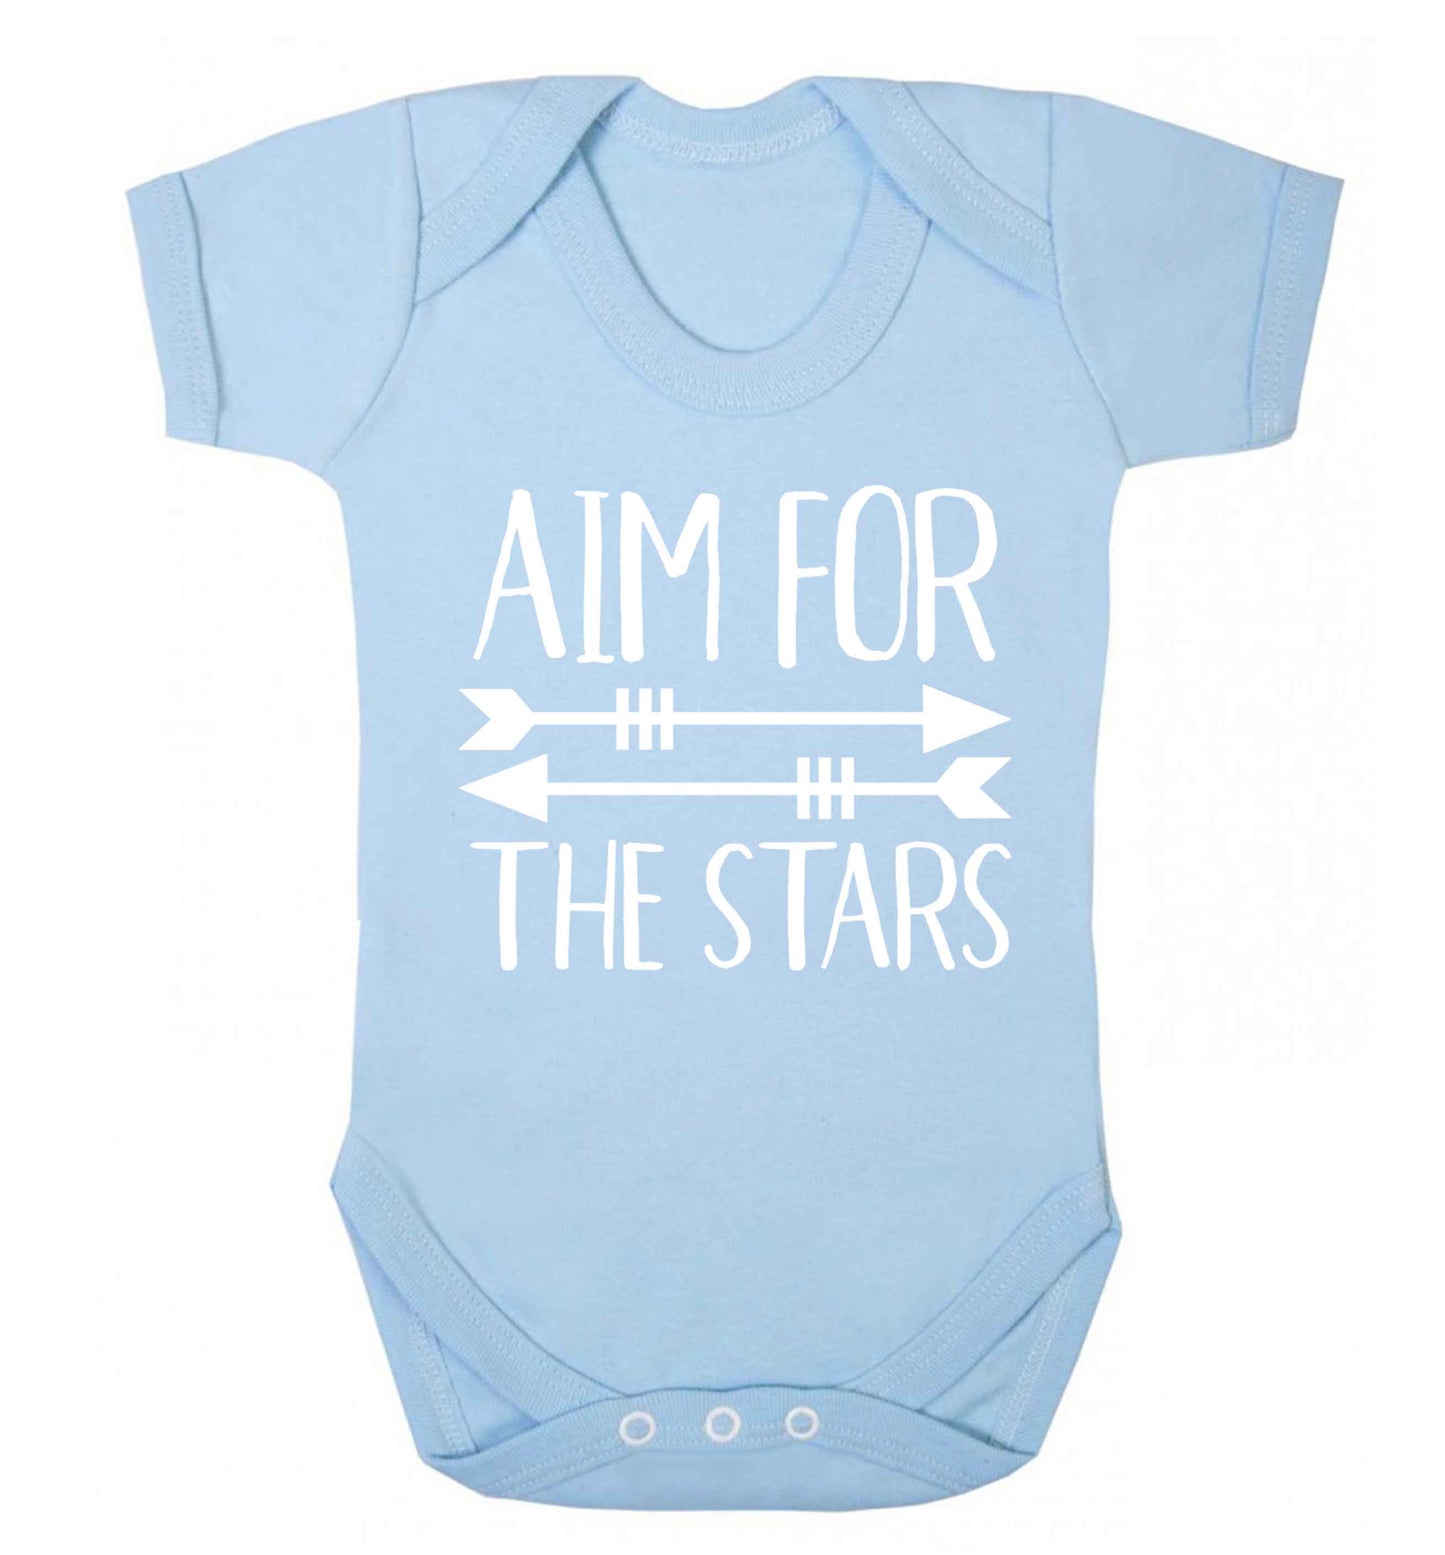 Aim for the stars Baby Vest pale blue 18-24 months